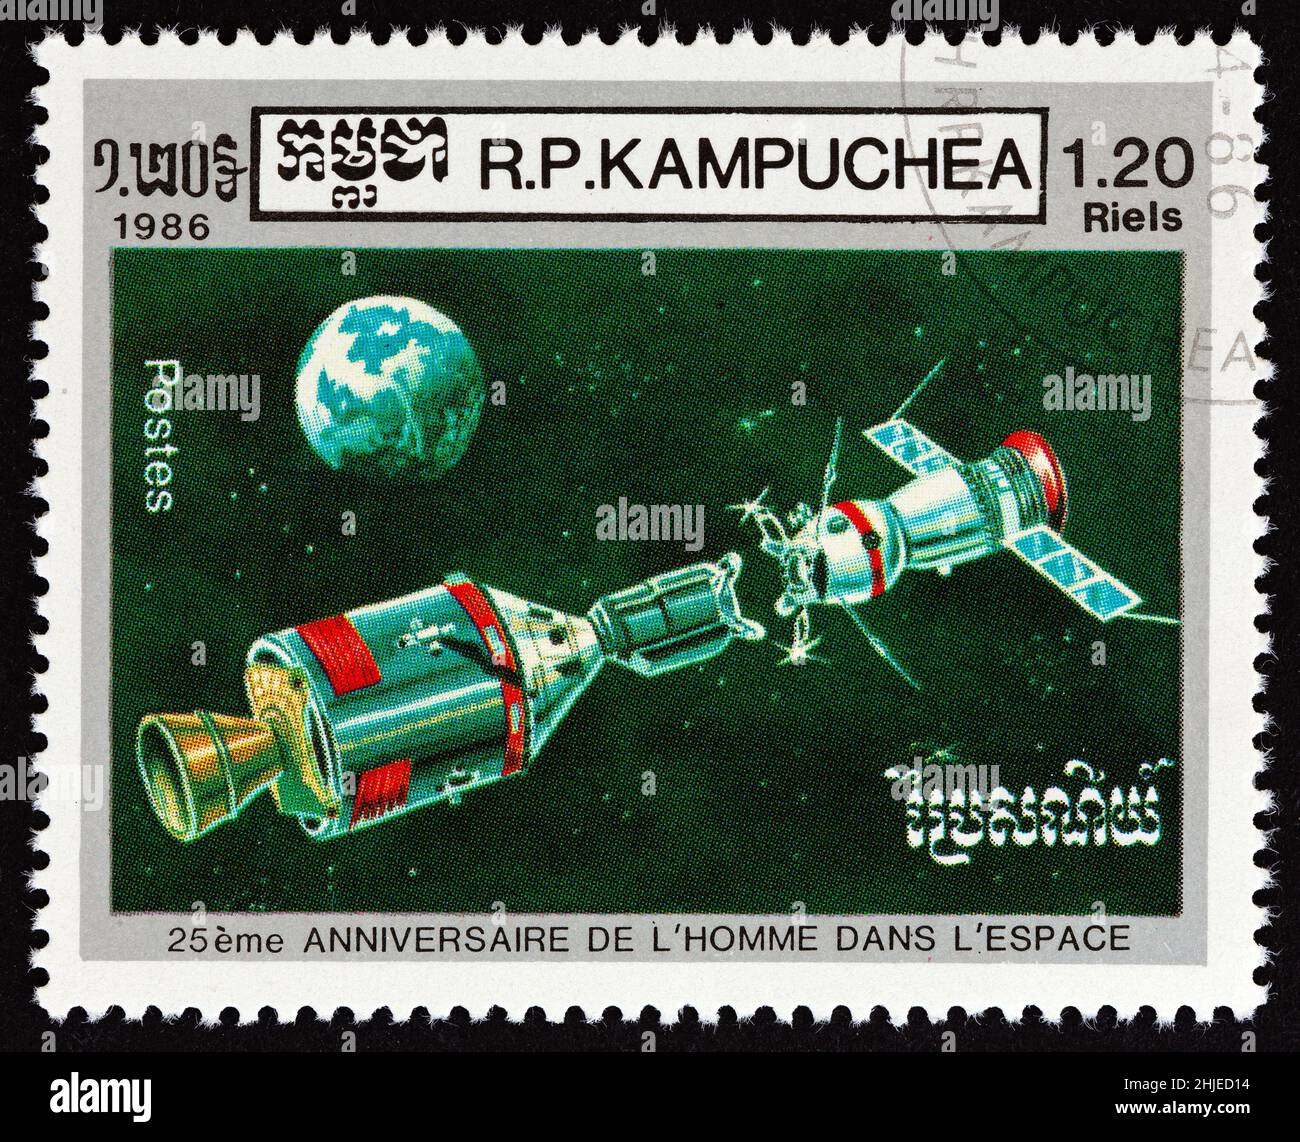 KAMPUCHEA - CIRCA 1986: A stamp printed in Kampuchea issued for the 25th Anniversary of First Man in Space shows Apollo and Soyuz preparing to dock. Stock Photo